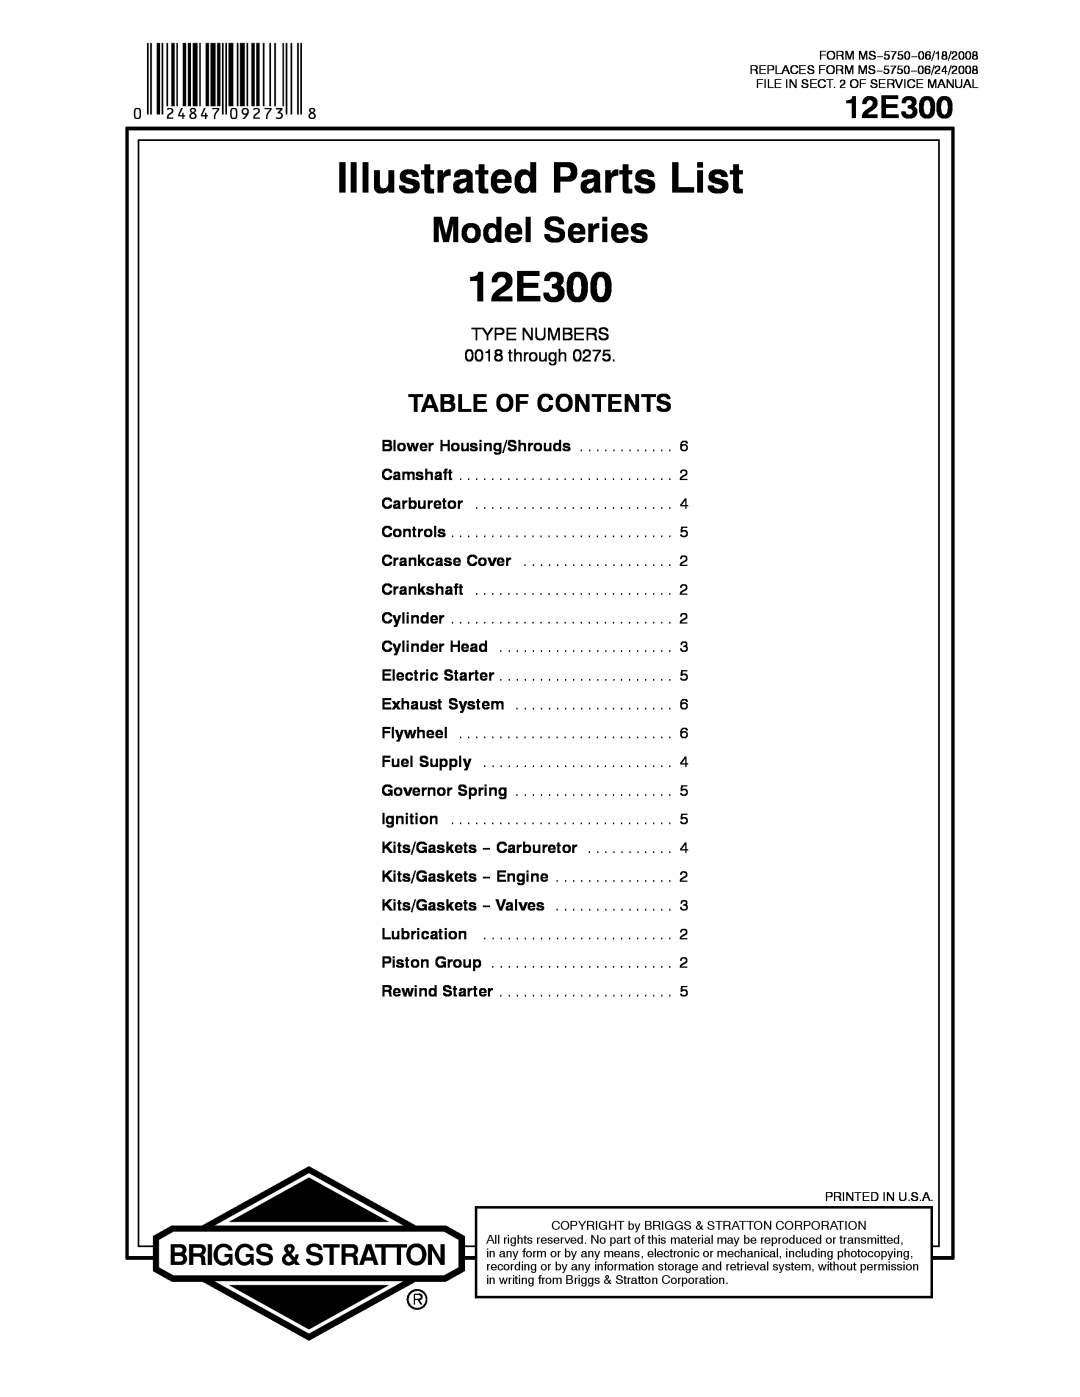 Briggs & Stratton 12E300 service manual Illustrated Parts List, Model Series, Table Of Contents, TYPE NUMBERS 0018 through 